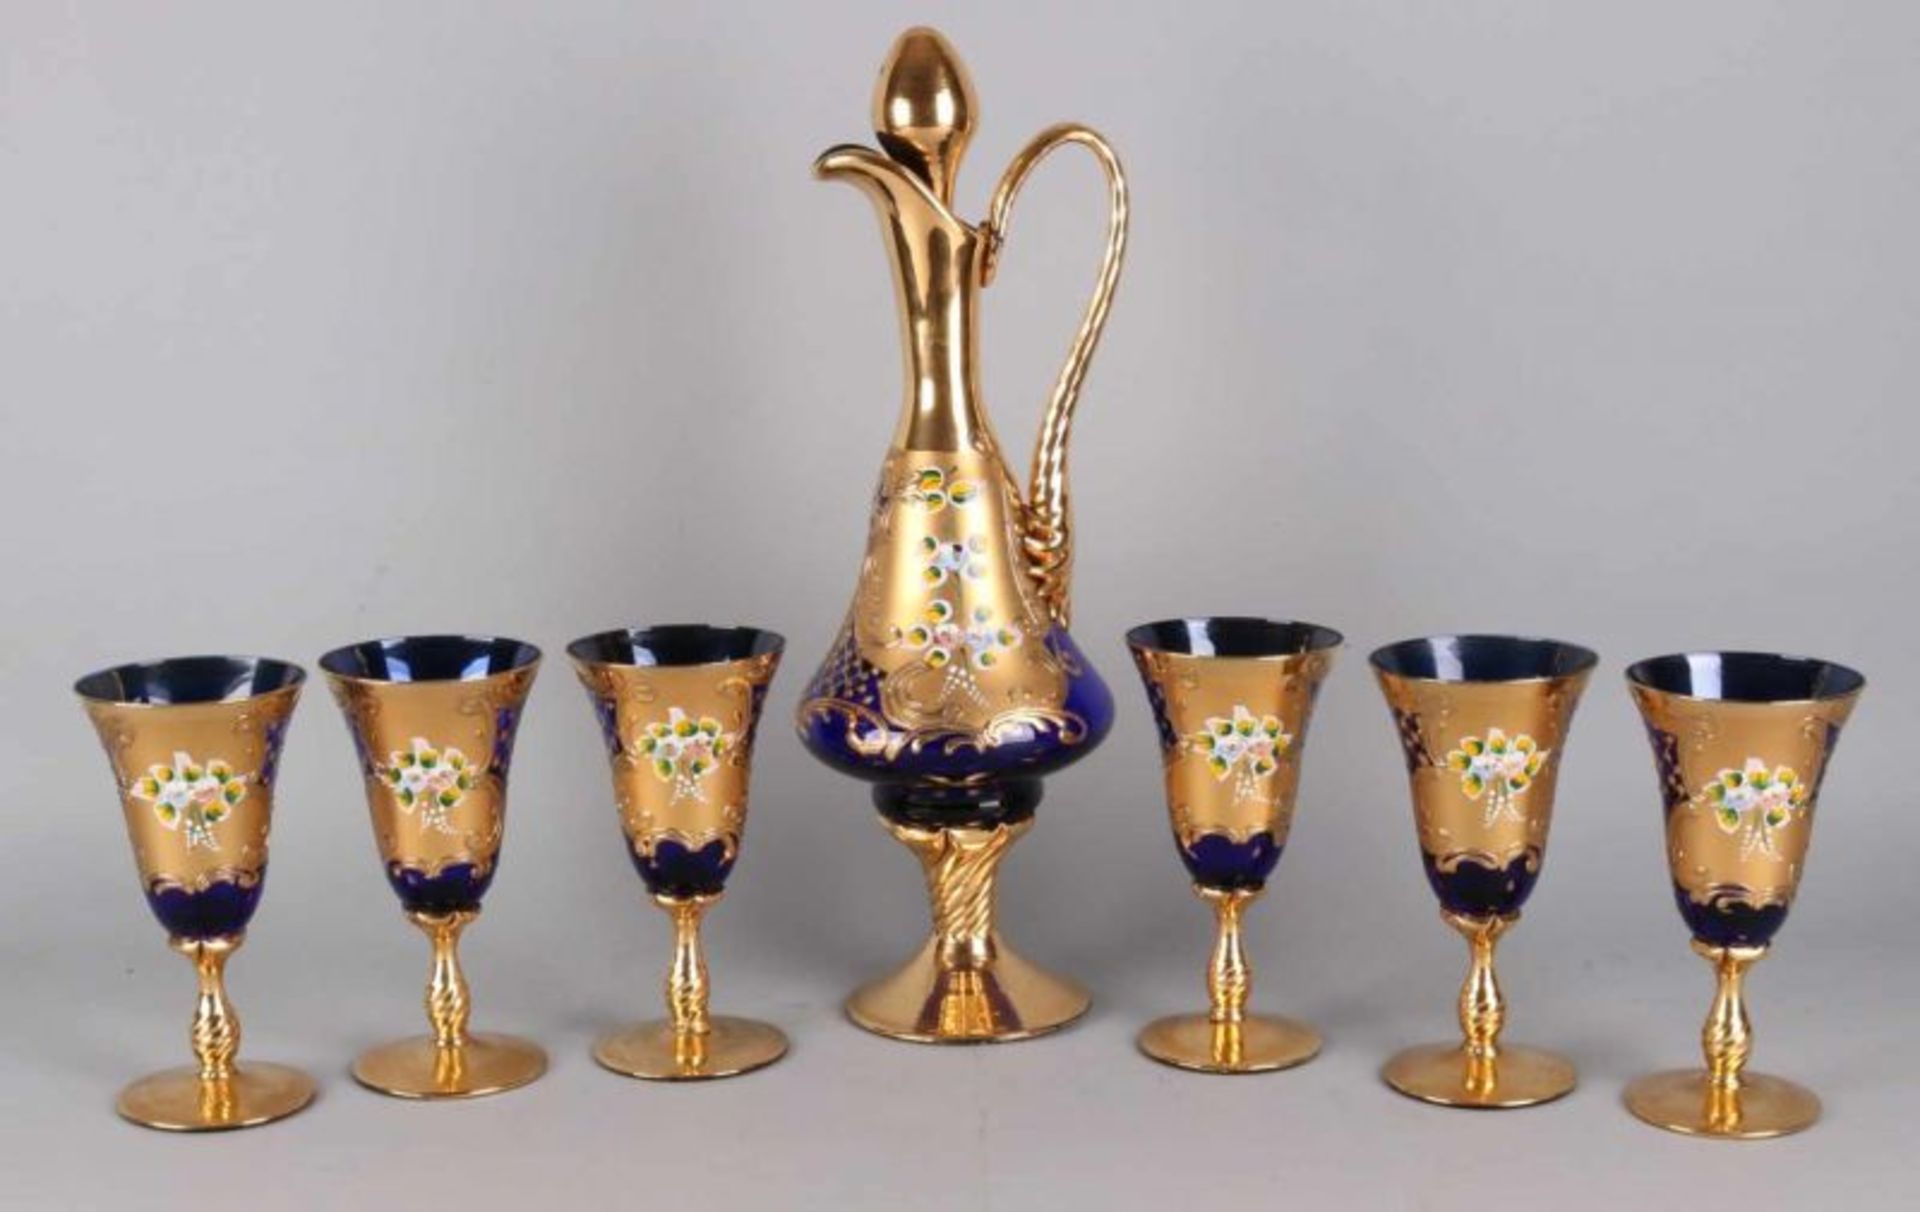 Old glassware with leaf gold and floral enamel decors, 20th century. The dishes consist of a